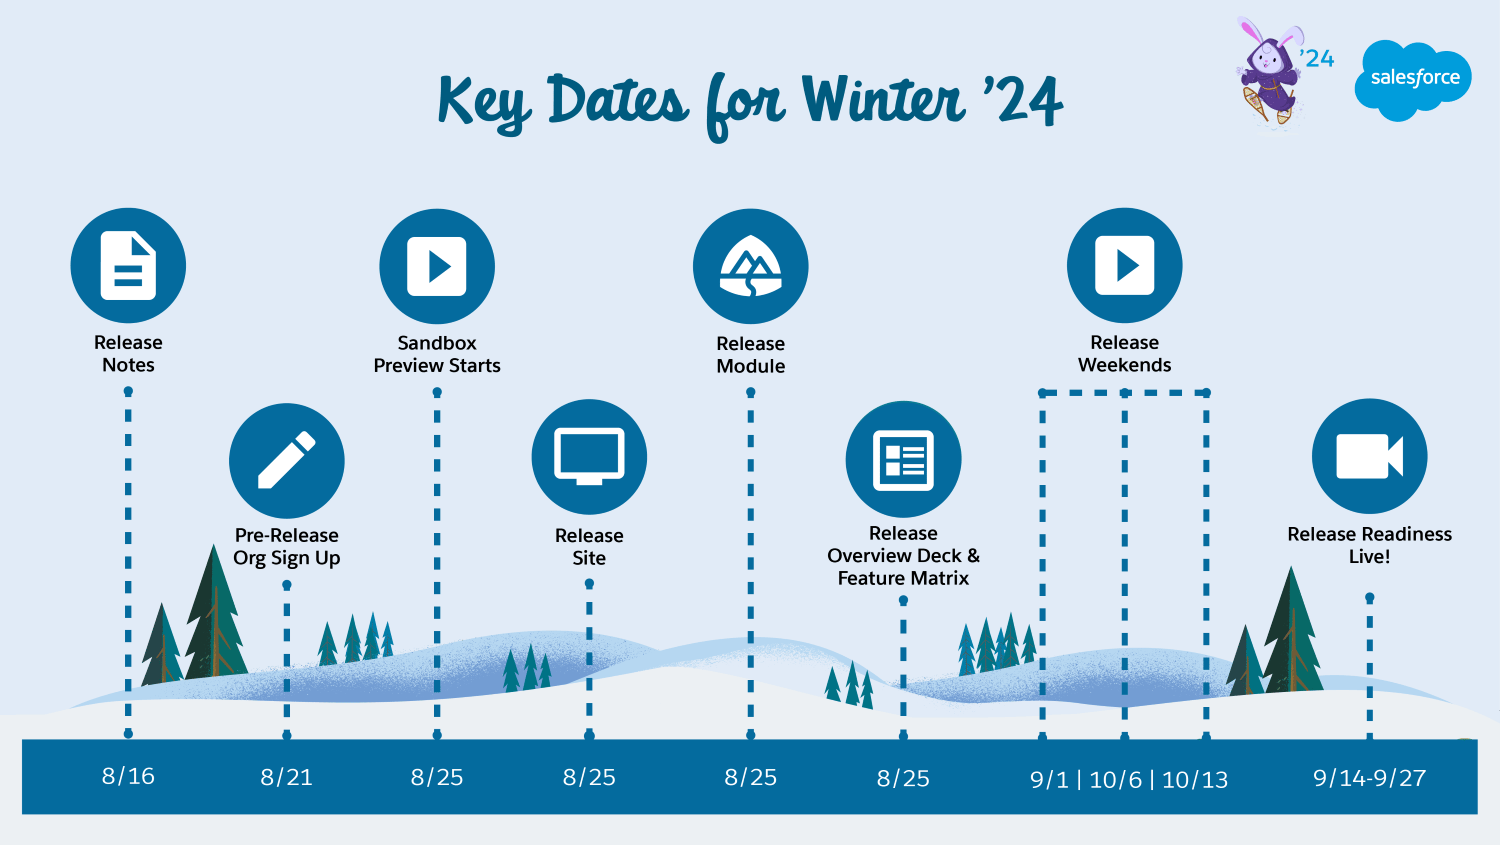 Key Dates for Winter '24